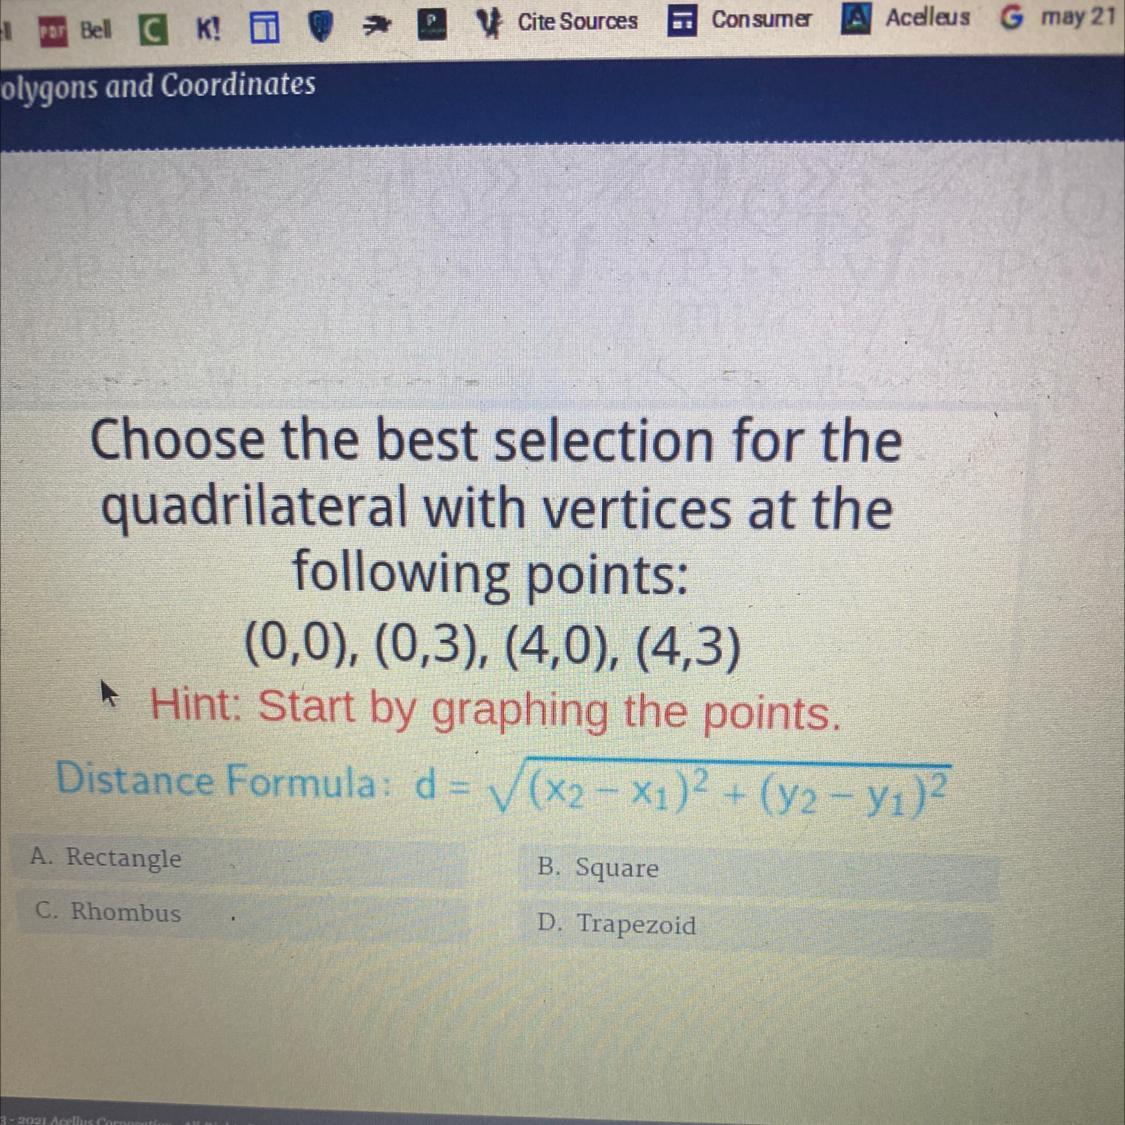 Choose The Best Selection For Thequadrilateral With Vertices At Thefollowing Points:(0,0), (0,3), (4,0),